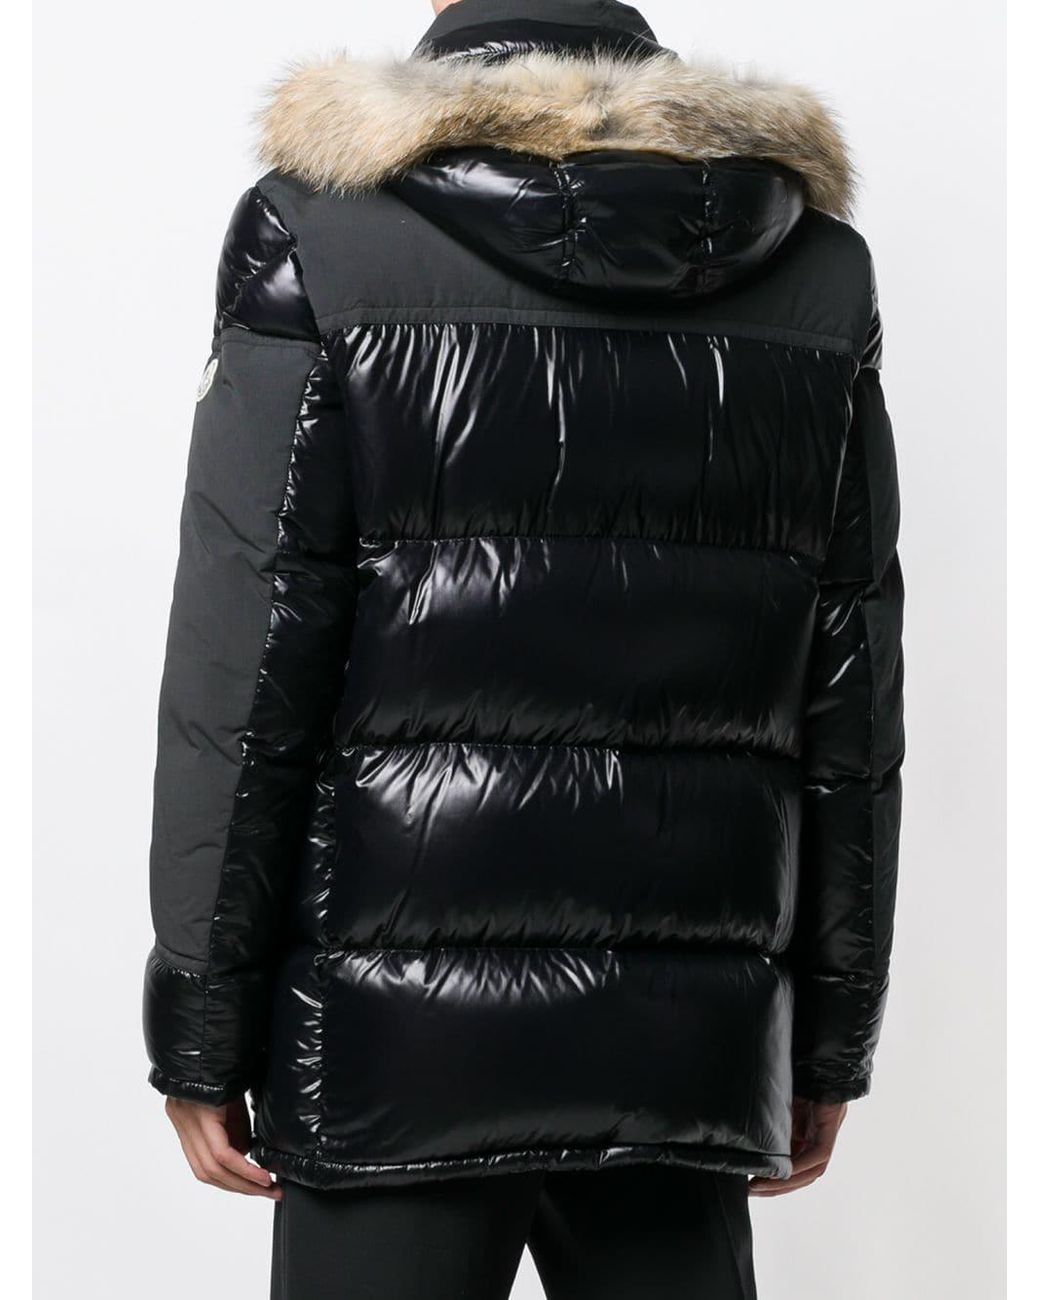 Moncler Synthetic Frey Padded Jacket in Black for Men - Save 25% - Lyst